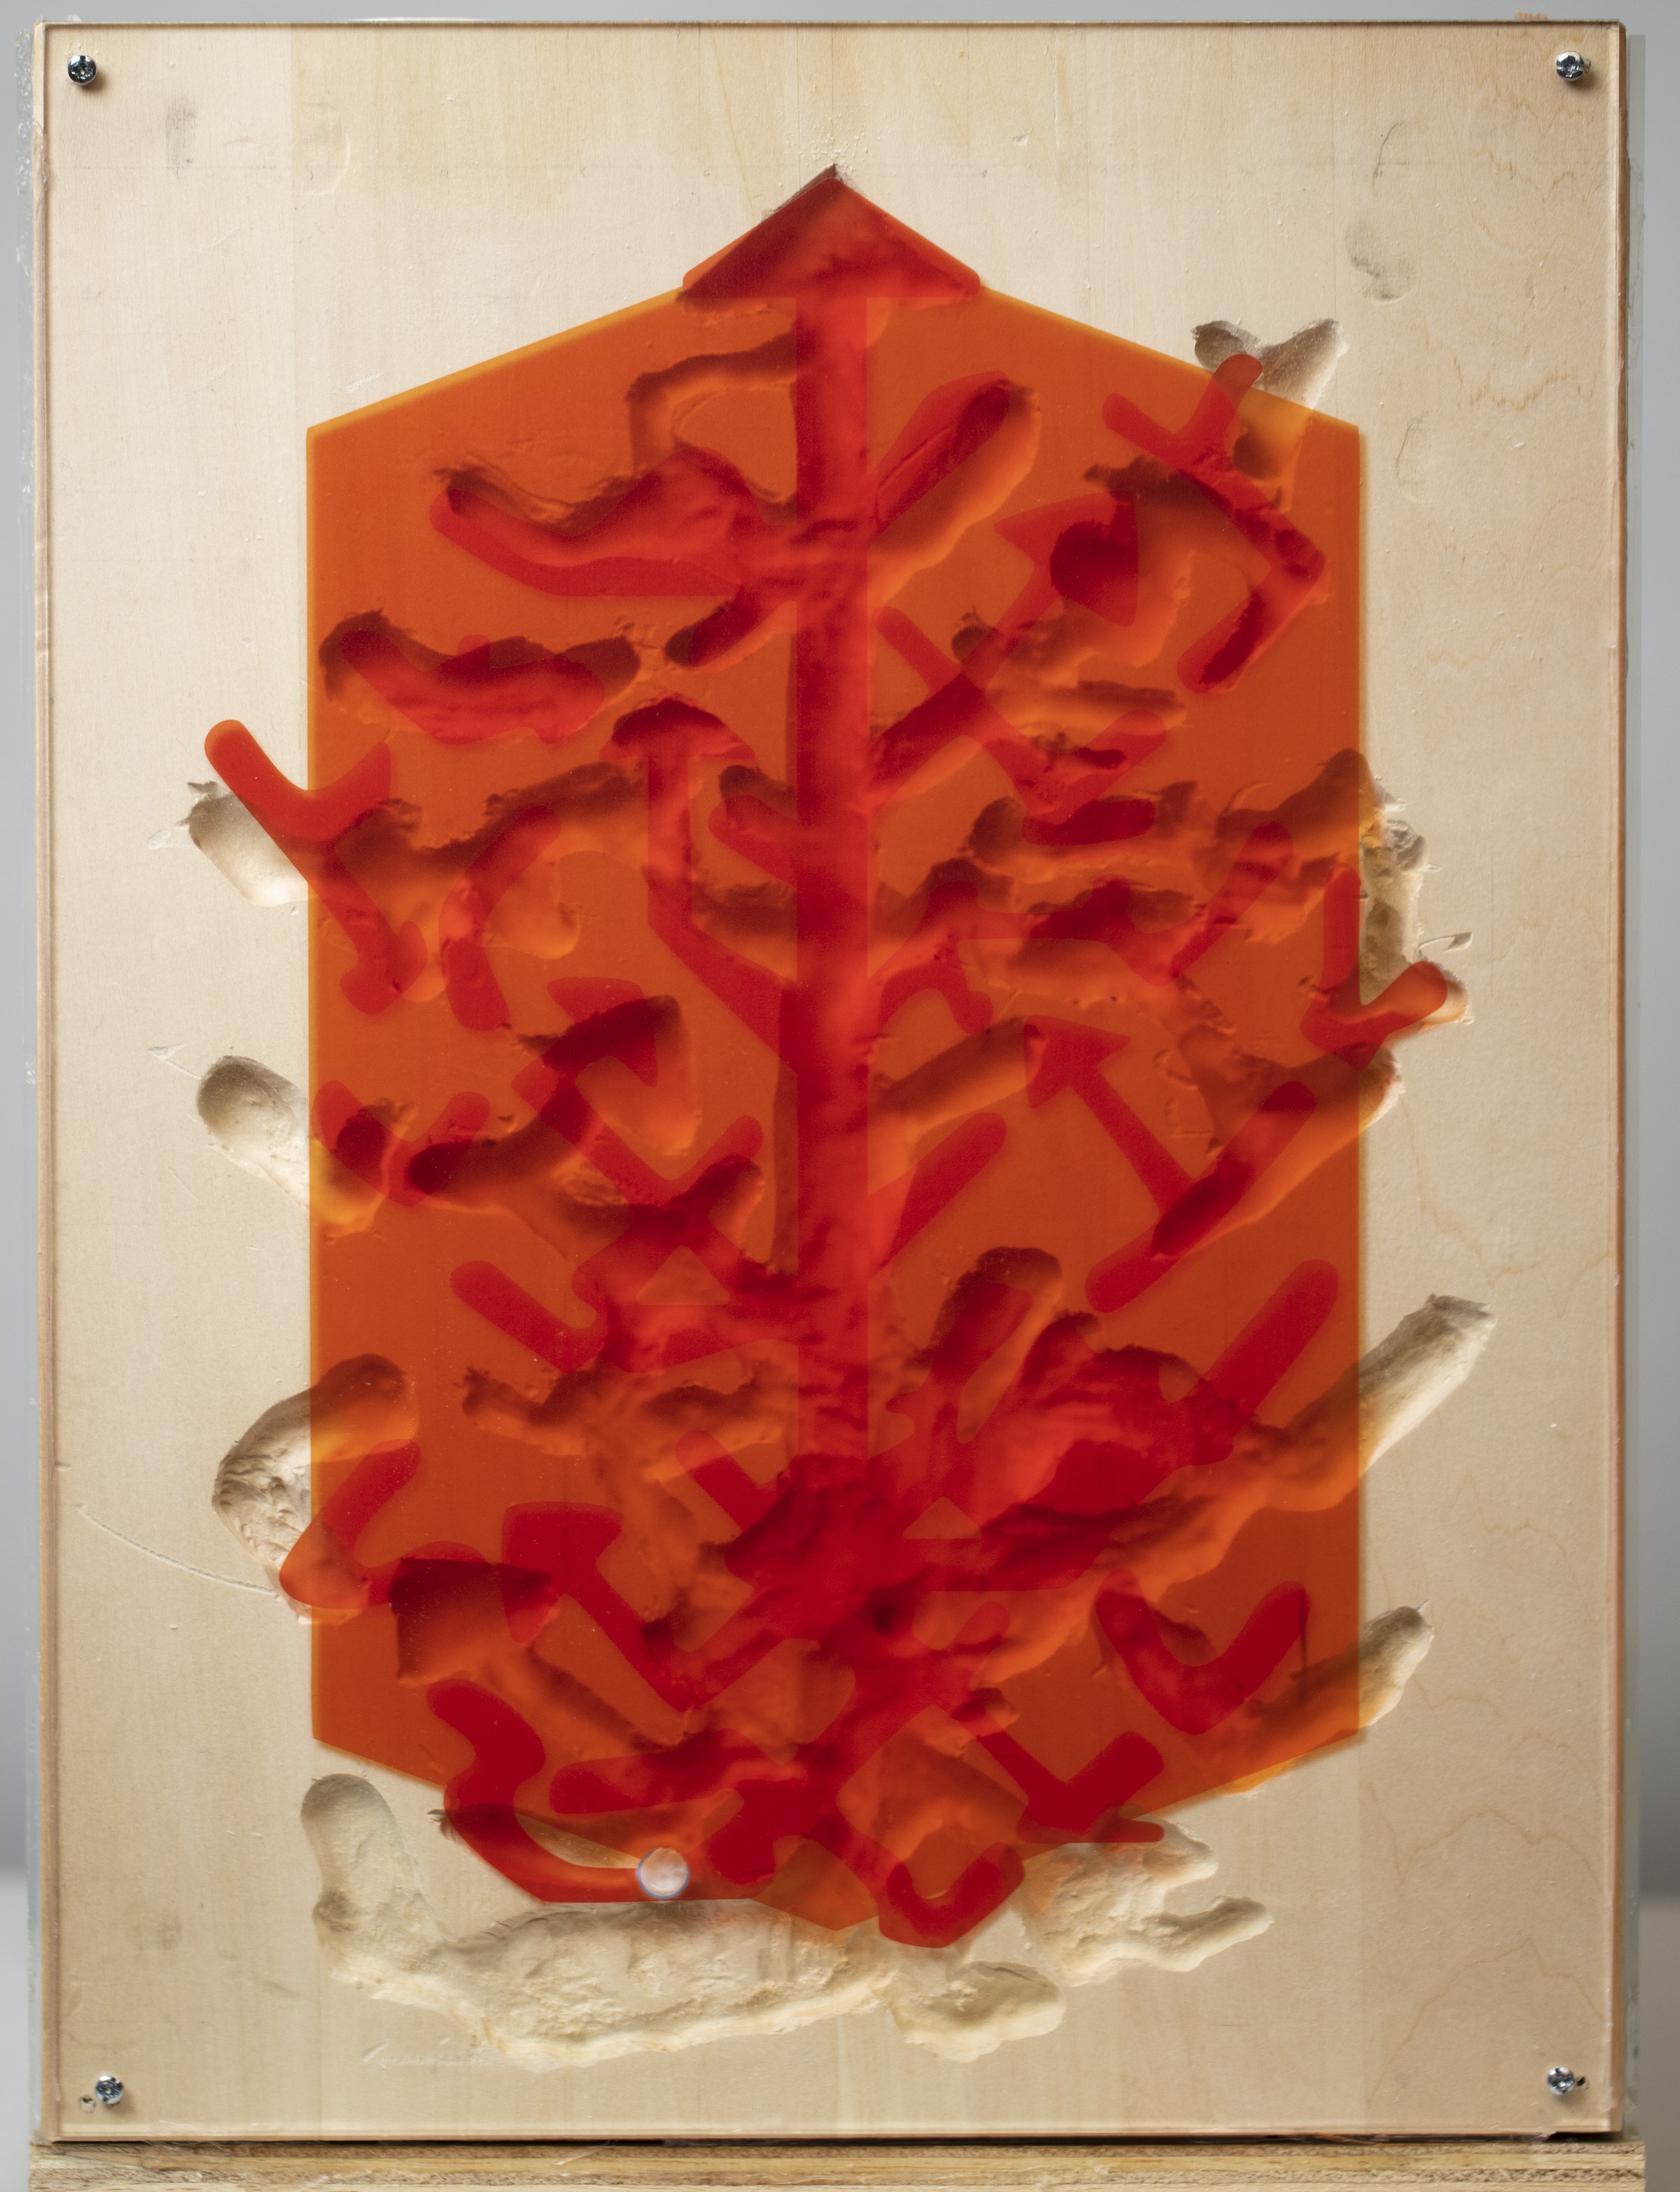 Fore Wall Nest: 'Growth Lattice', Hand-carved pine wood and UV-printed plexiglass